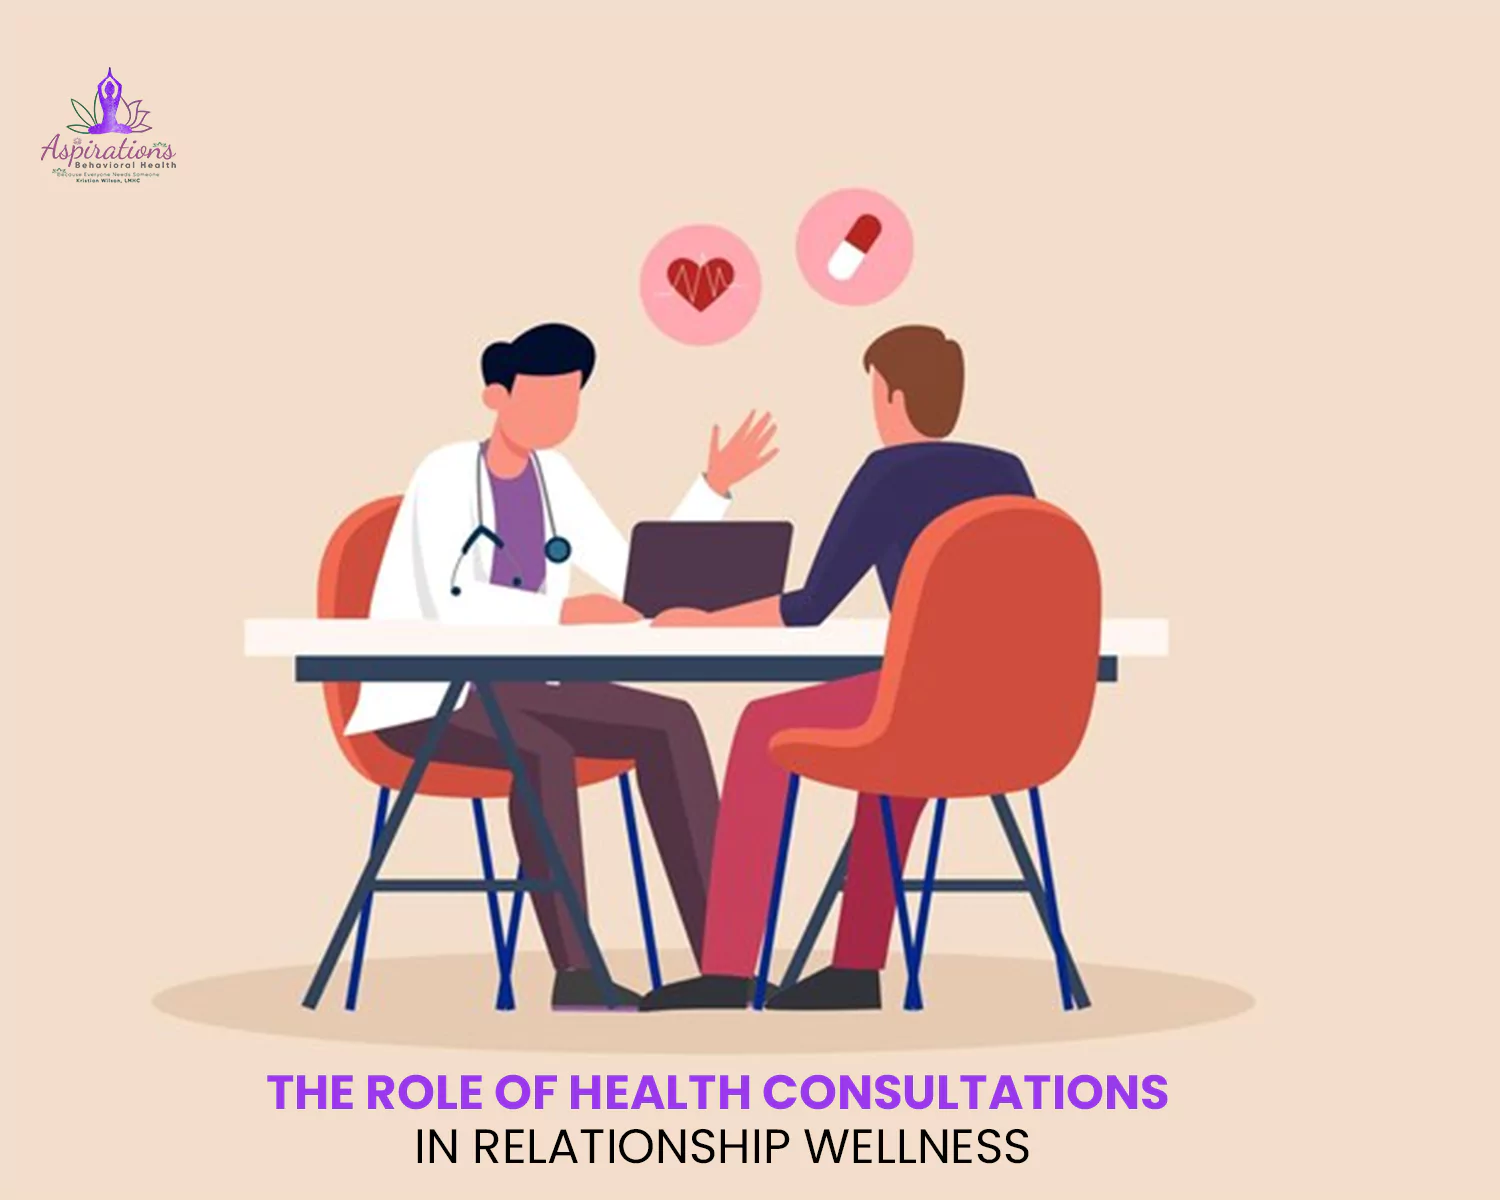 The Role of Health Consultations in Relationship Wellness: